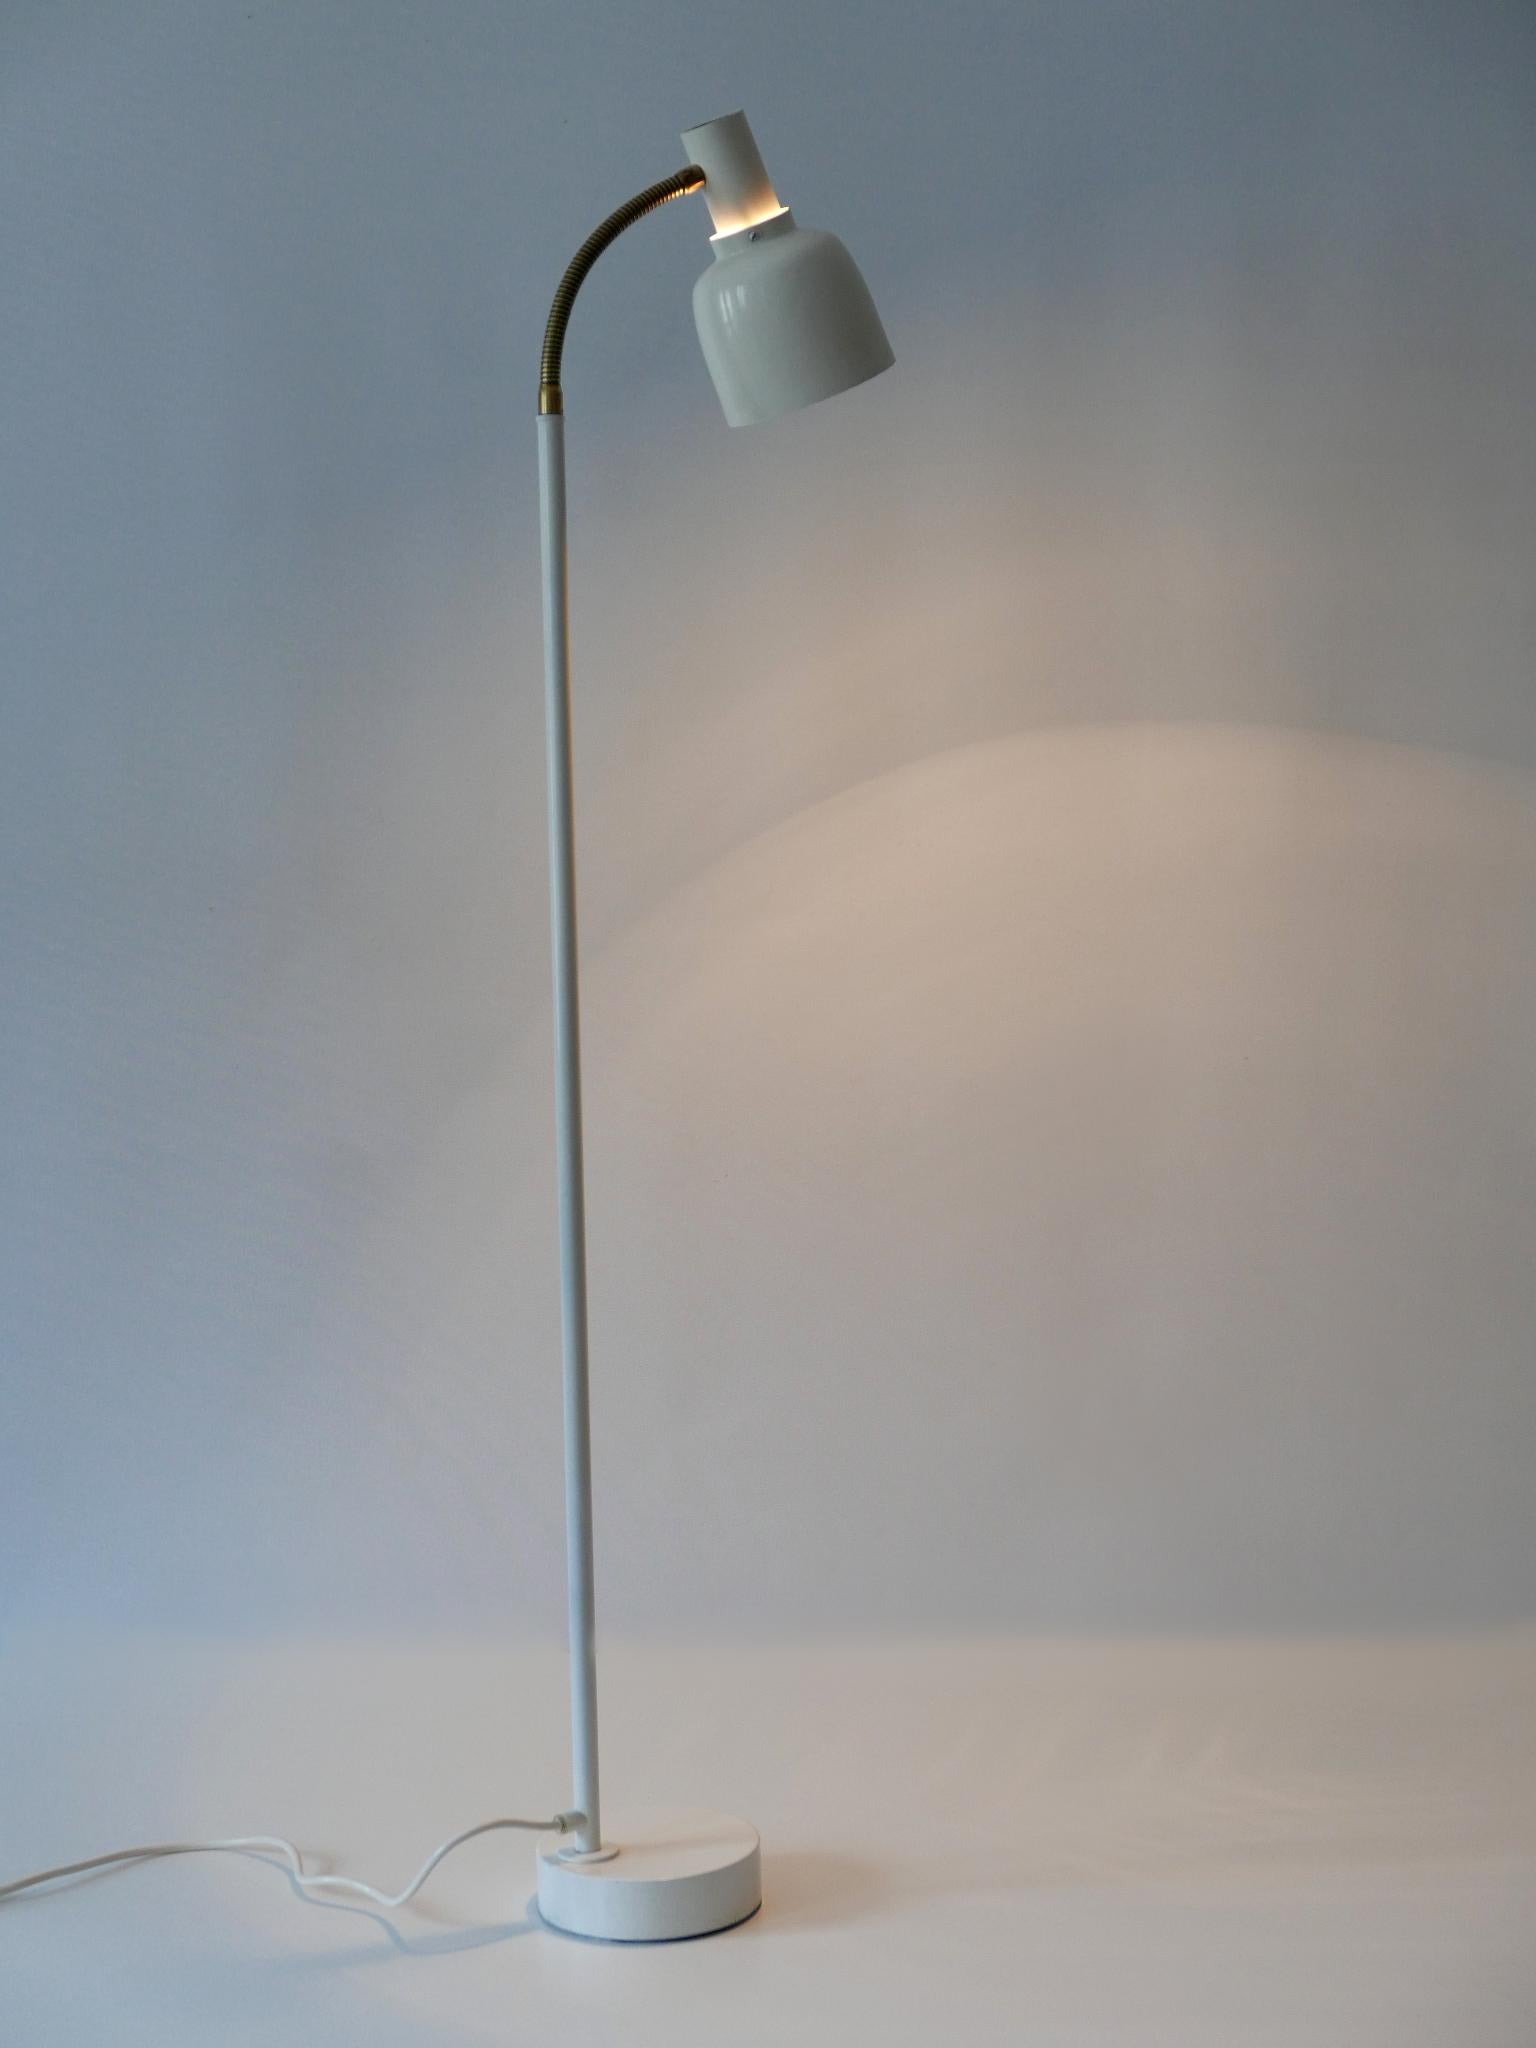 Rare and elegant Mid-Century Modern floor lamp or reading light with adjustable diffuser. Designed by Hans-Agne Jakobsson for AB Markaryd, Sweden, 1960s.

Executed in brass, white enameled aluminium and metal, the lamp needs 1 x E27 Edison screw